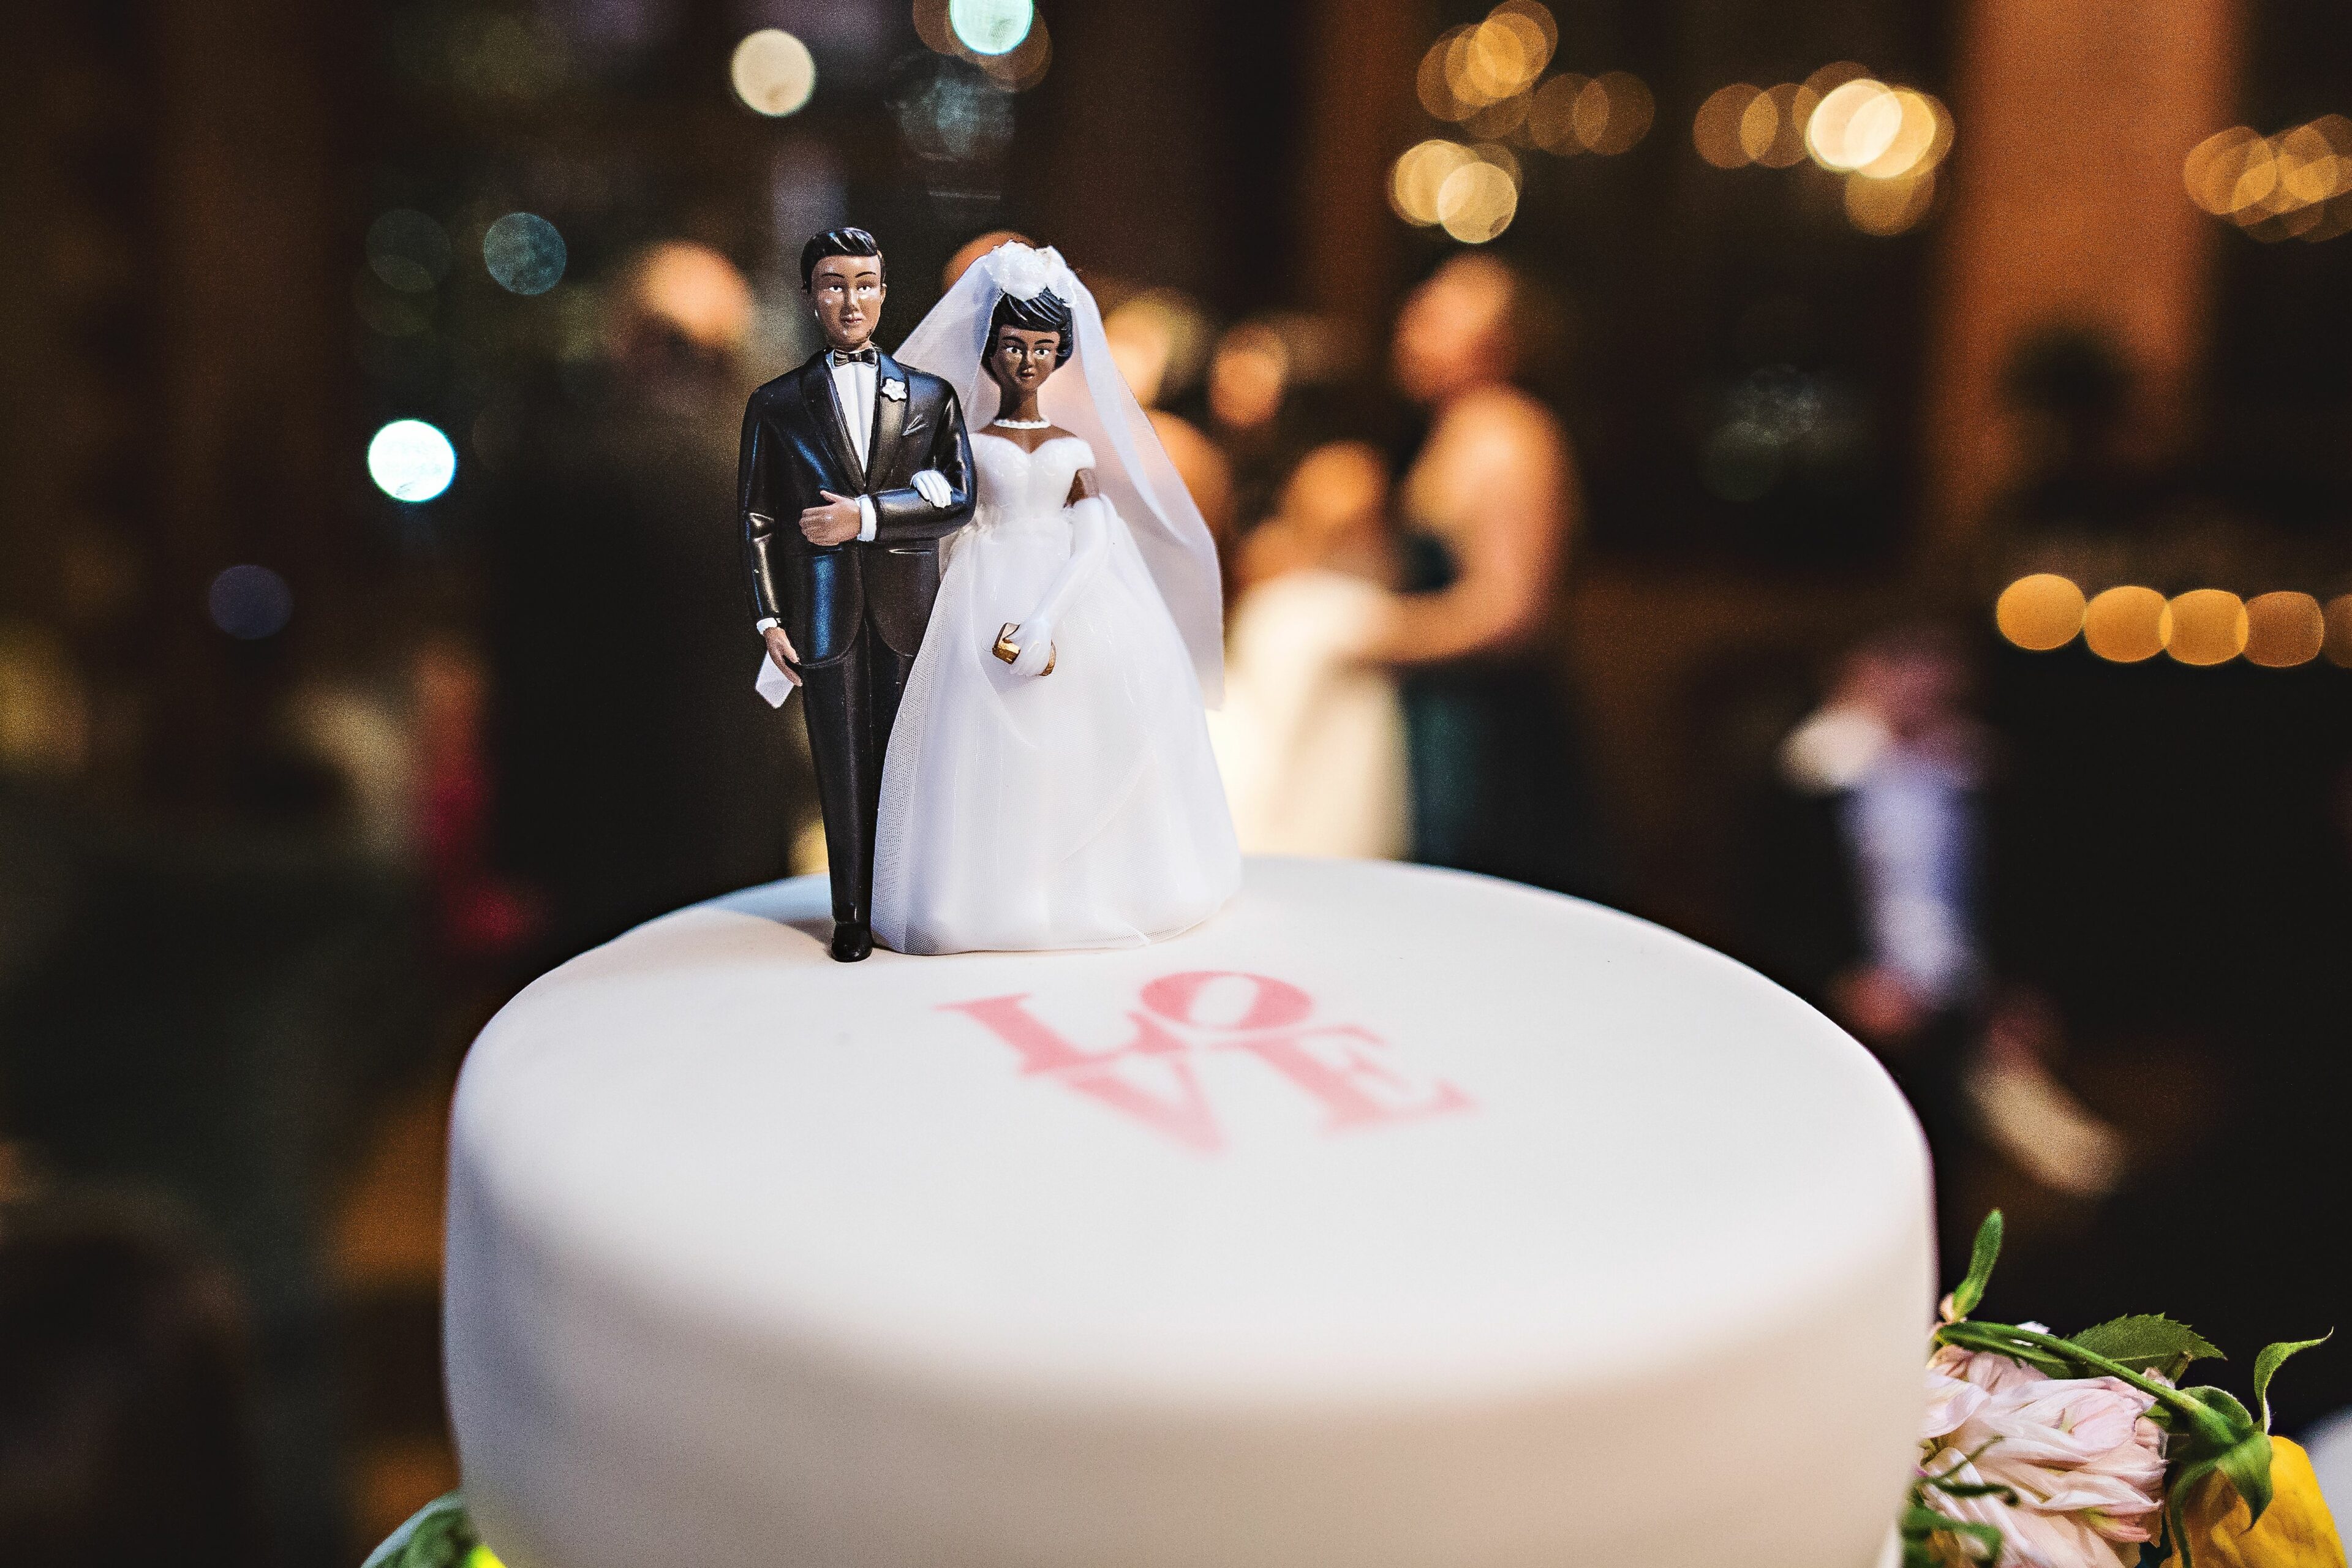 Wedding Cake Topper NYC Catering